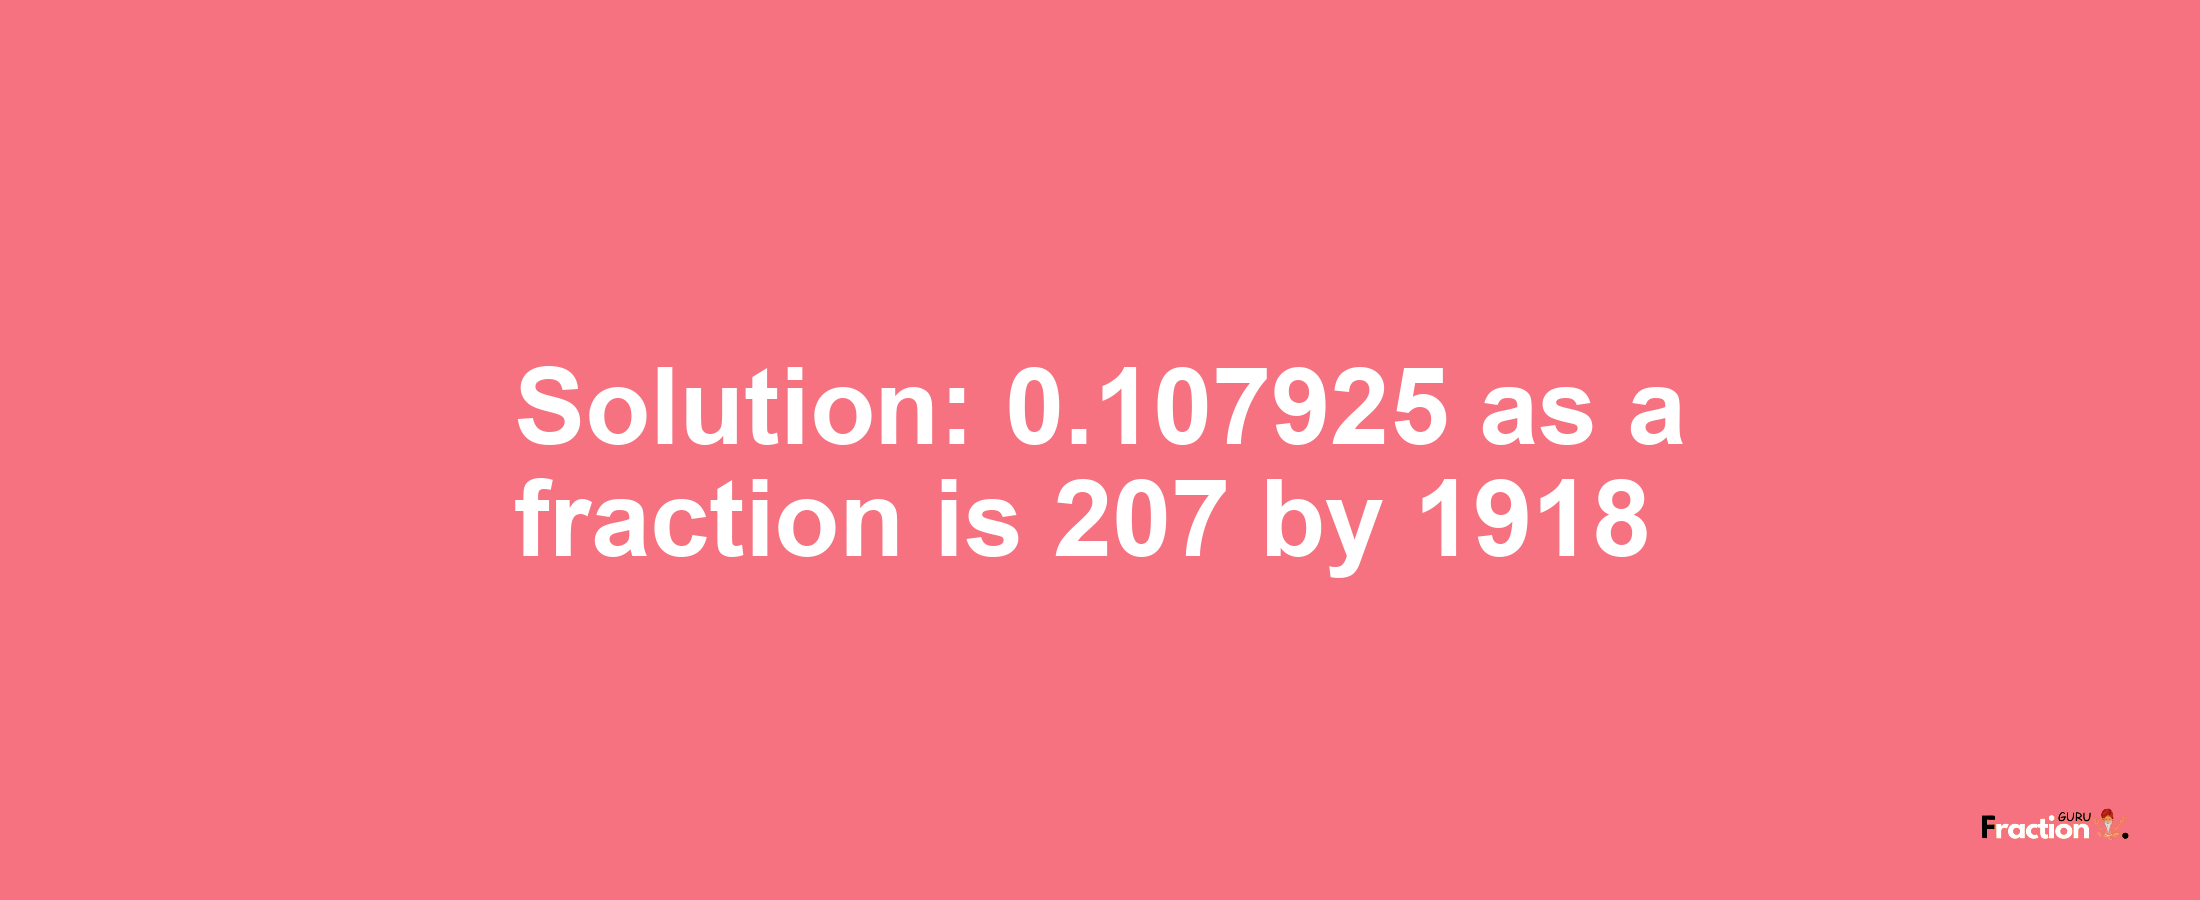 Solution:0.107925 as a fraction is 207/1918